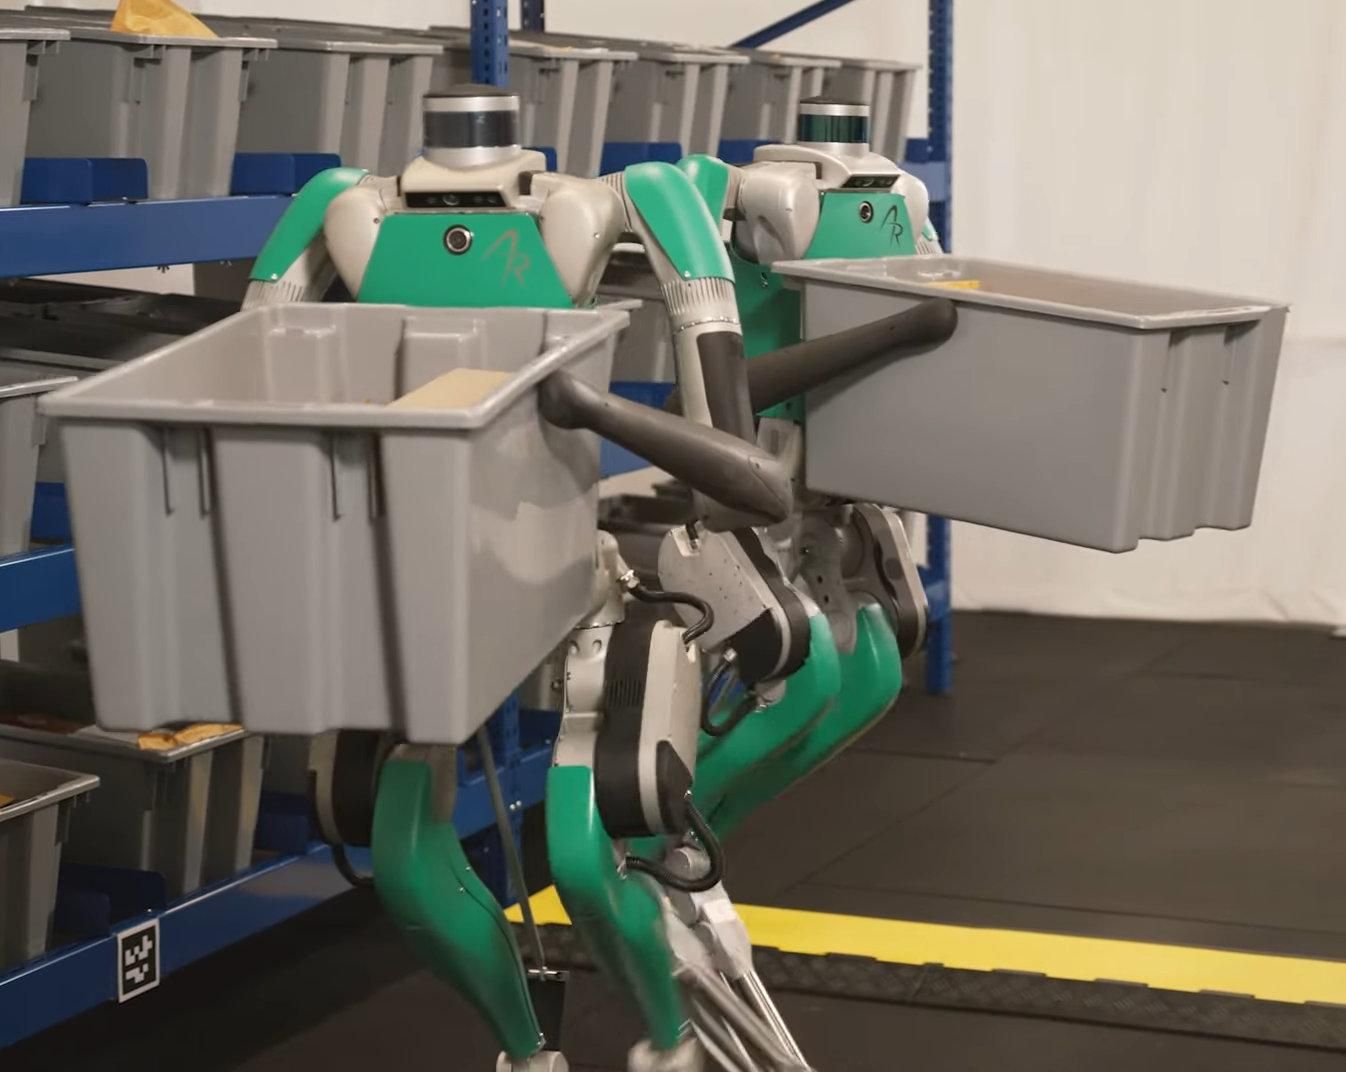 Two digit robots working in a warehouse